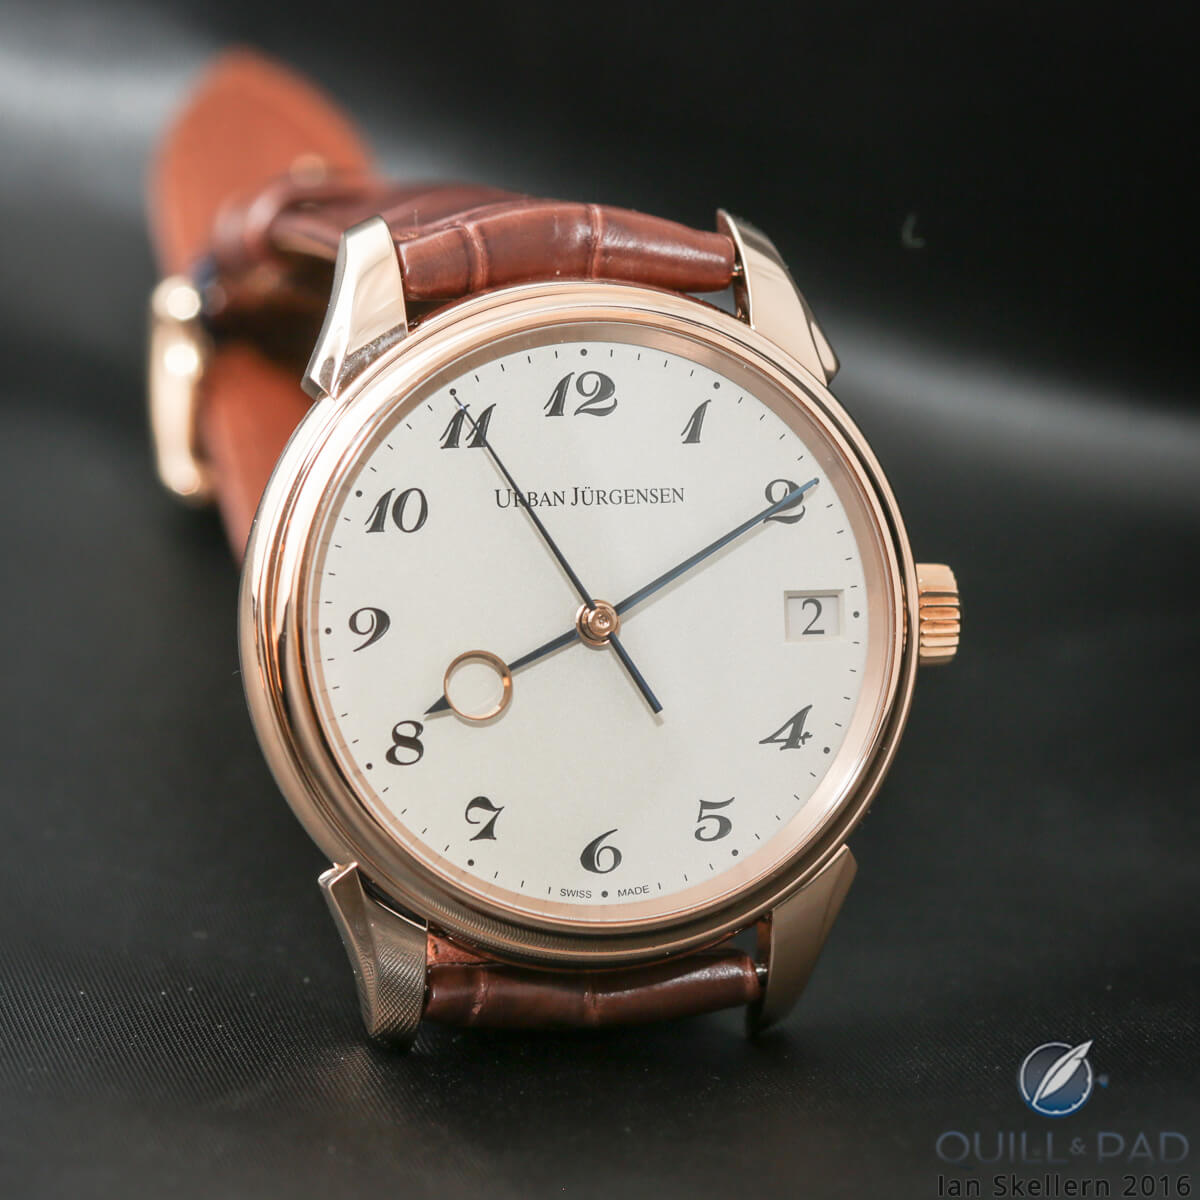 Urban Jürgensen Jules Collection Reference 2240 with grenage (frosted) dial and red gold case